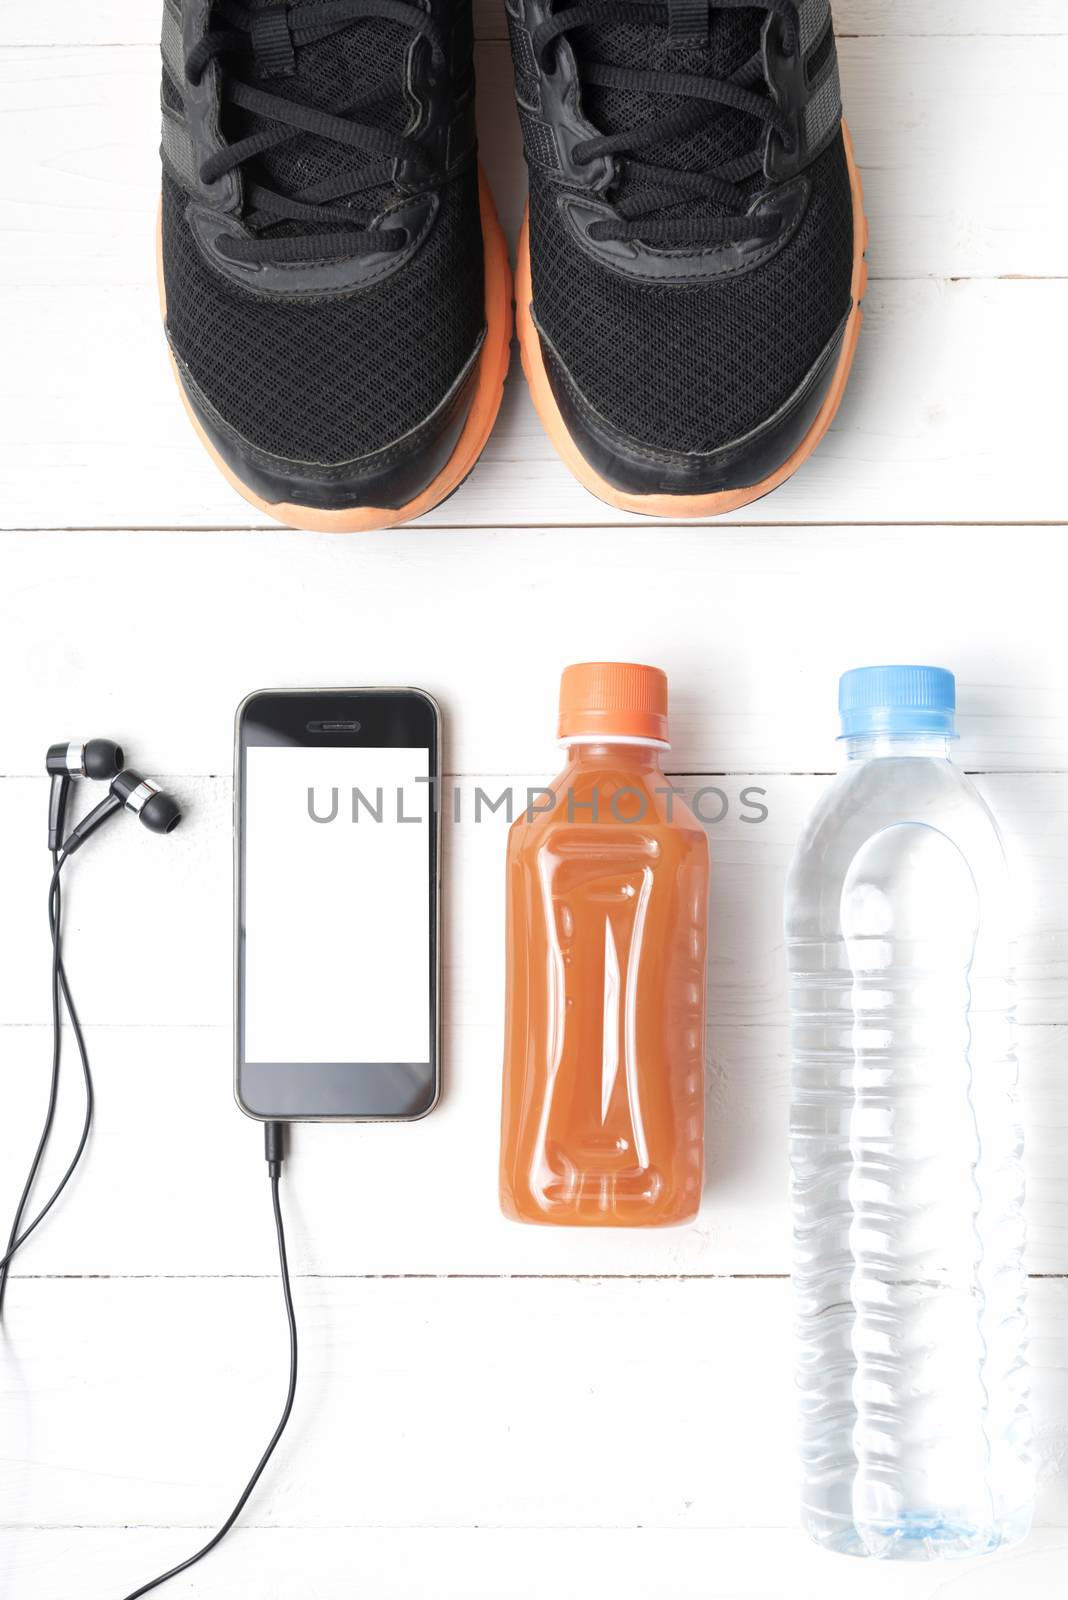 running shoes,orange juice,drinking water and phone by ammza12